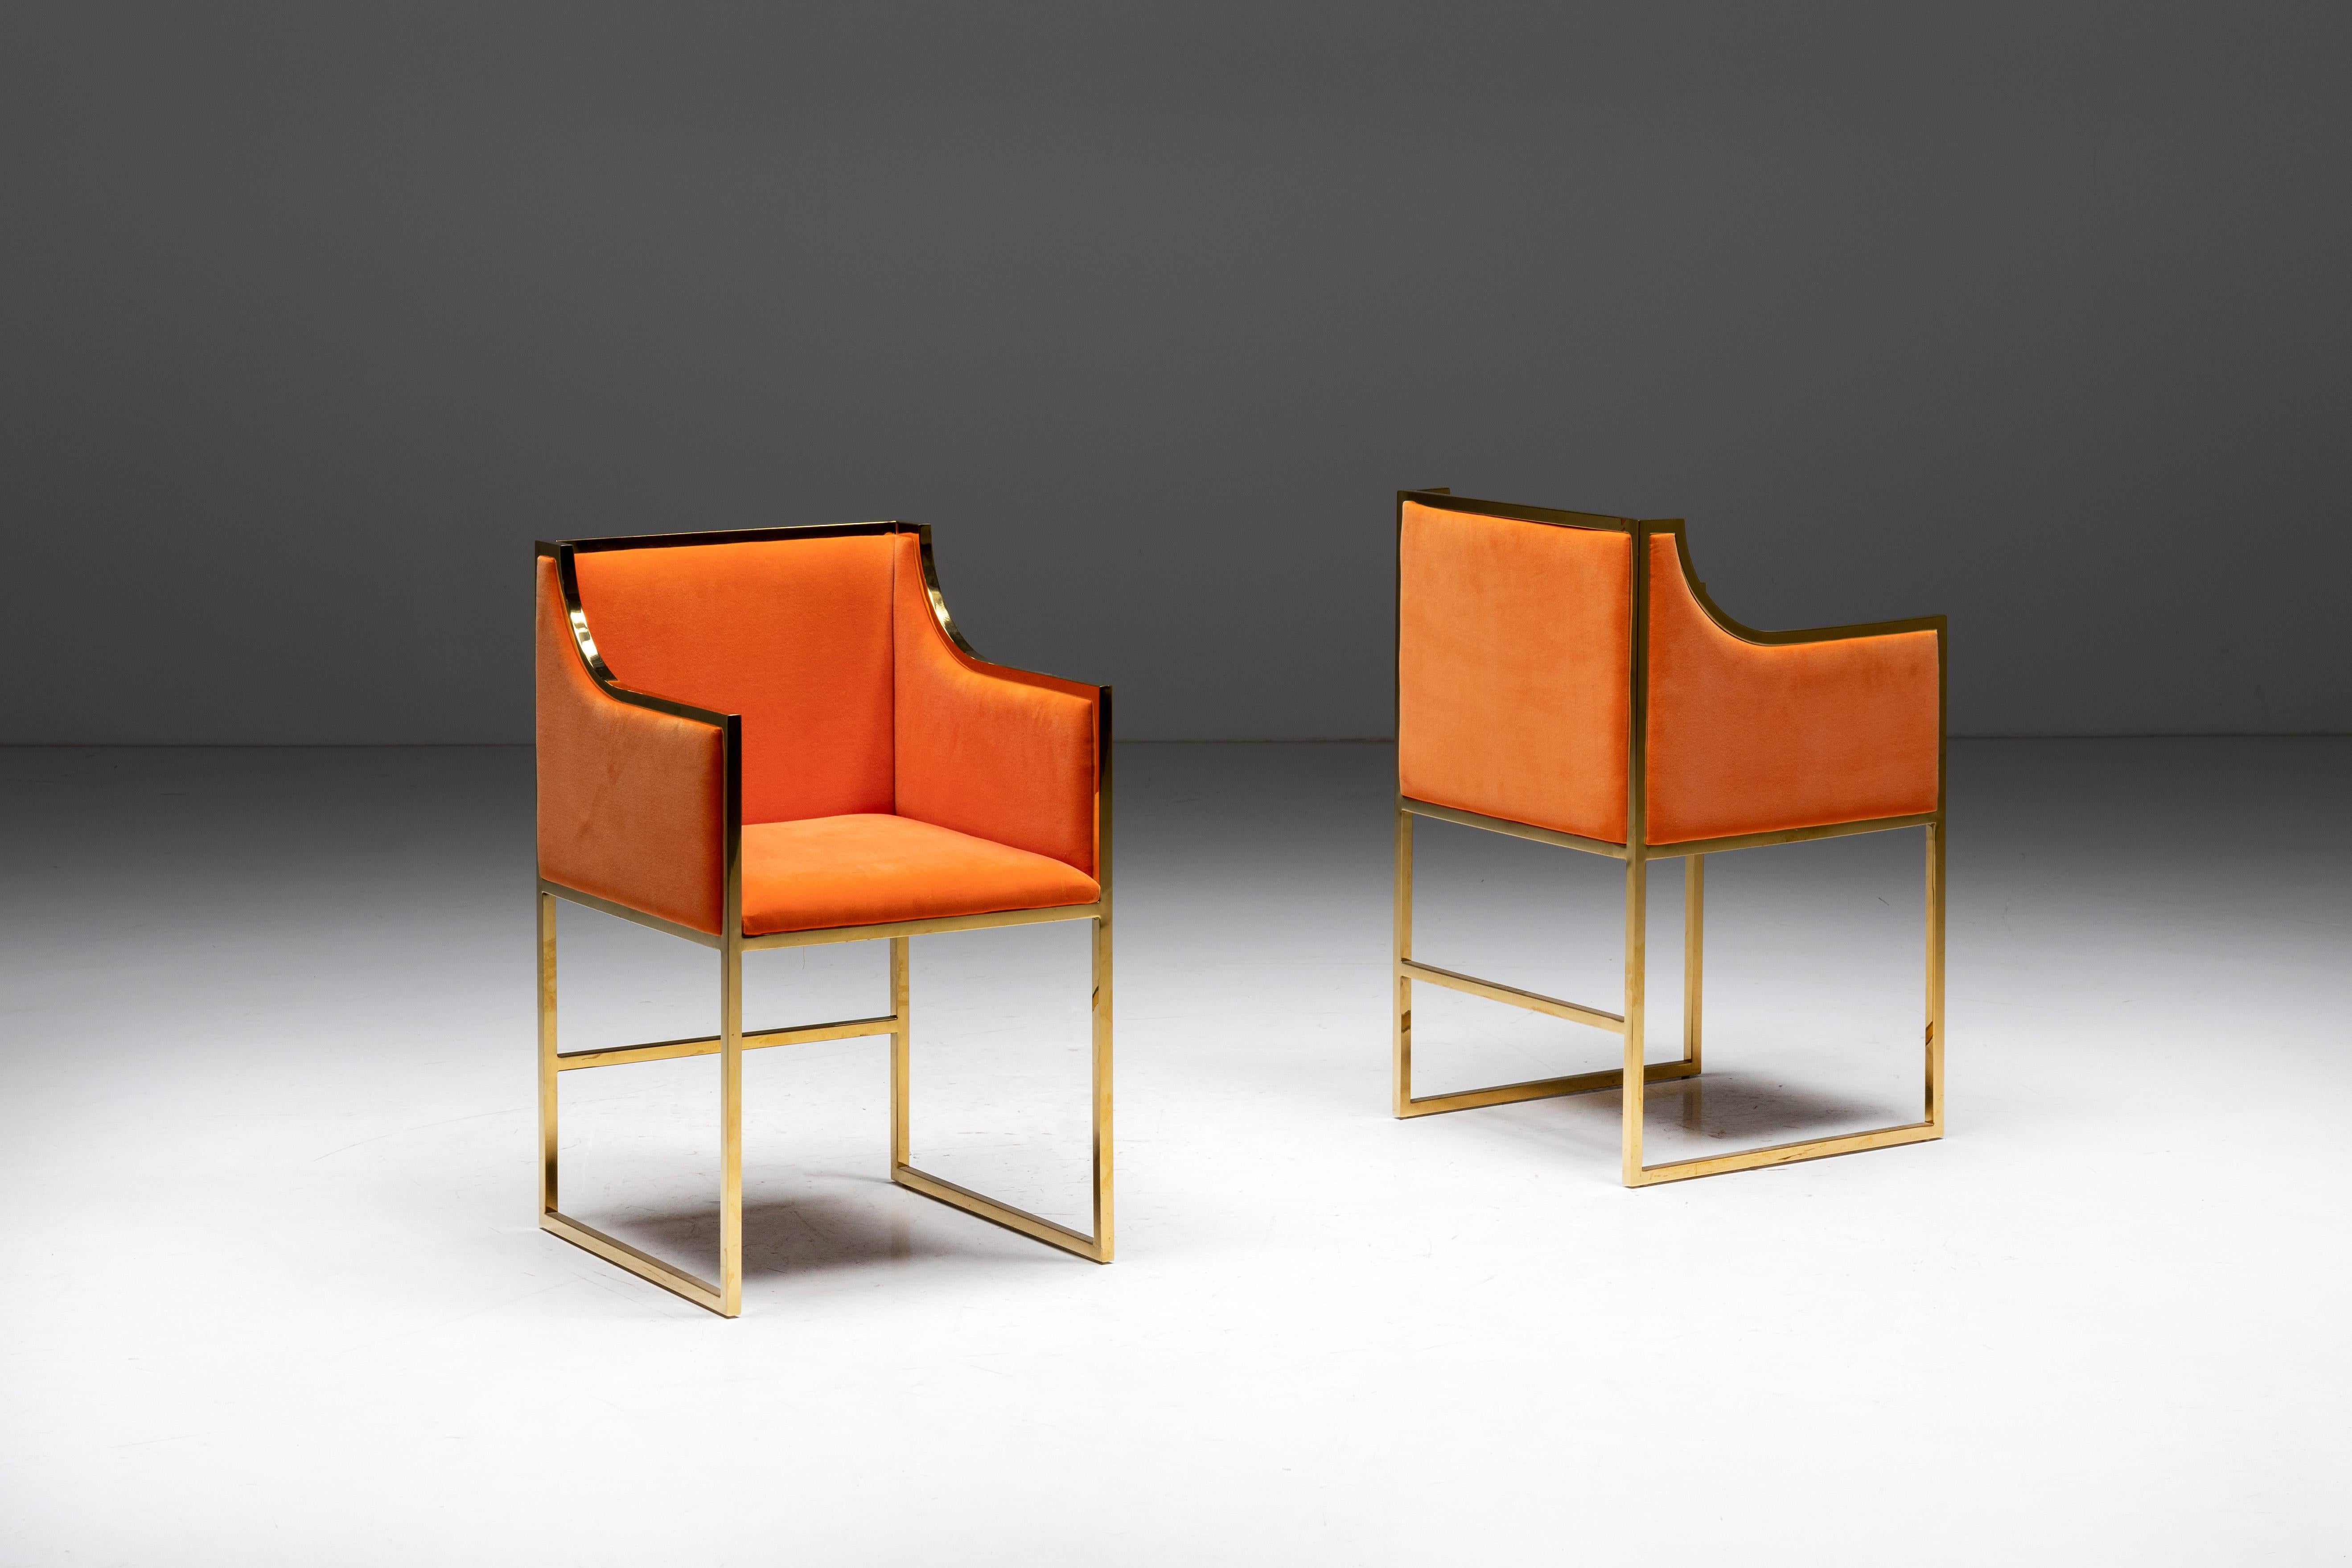 Exquisite orange velvet dining chairs, reminiscent of the iconic Maison Jansen style from 1980s France. This stunning set of chairs, in impeccable condition, exudes timeless elegance and opulence. Their vibrant orange velvet upholstery adds a bold